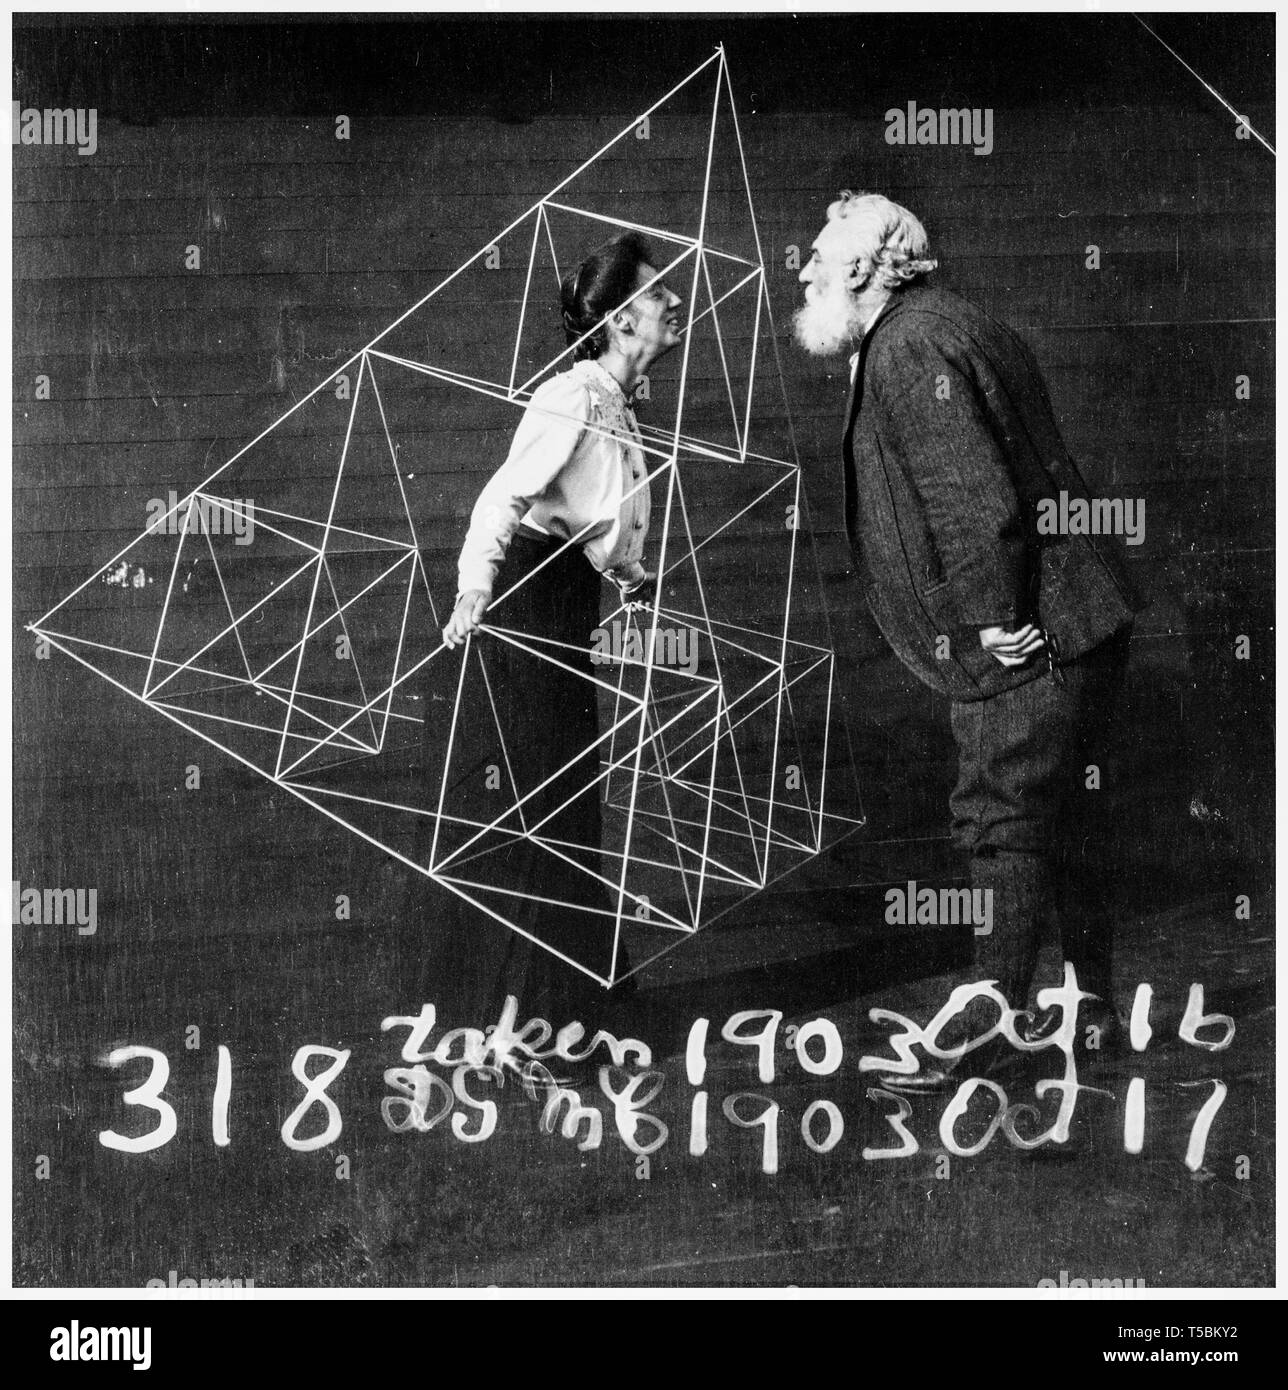 Alexander Graham Bell (1847-1922) facing his wife, Mabel Hubbard Gardiner Bell, who is standing in a tetrahedral kite, 1902 Stock Photo